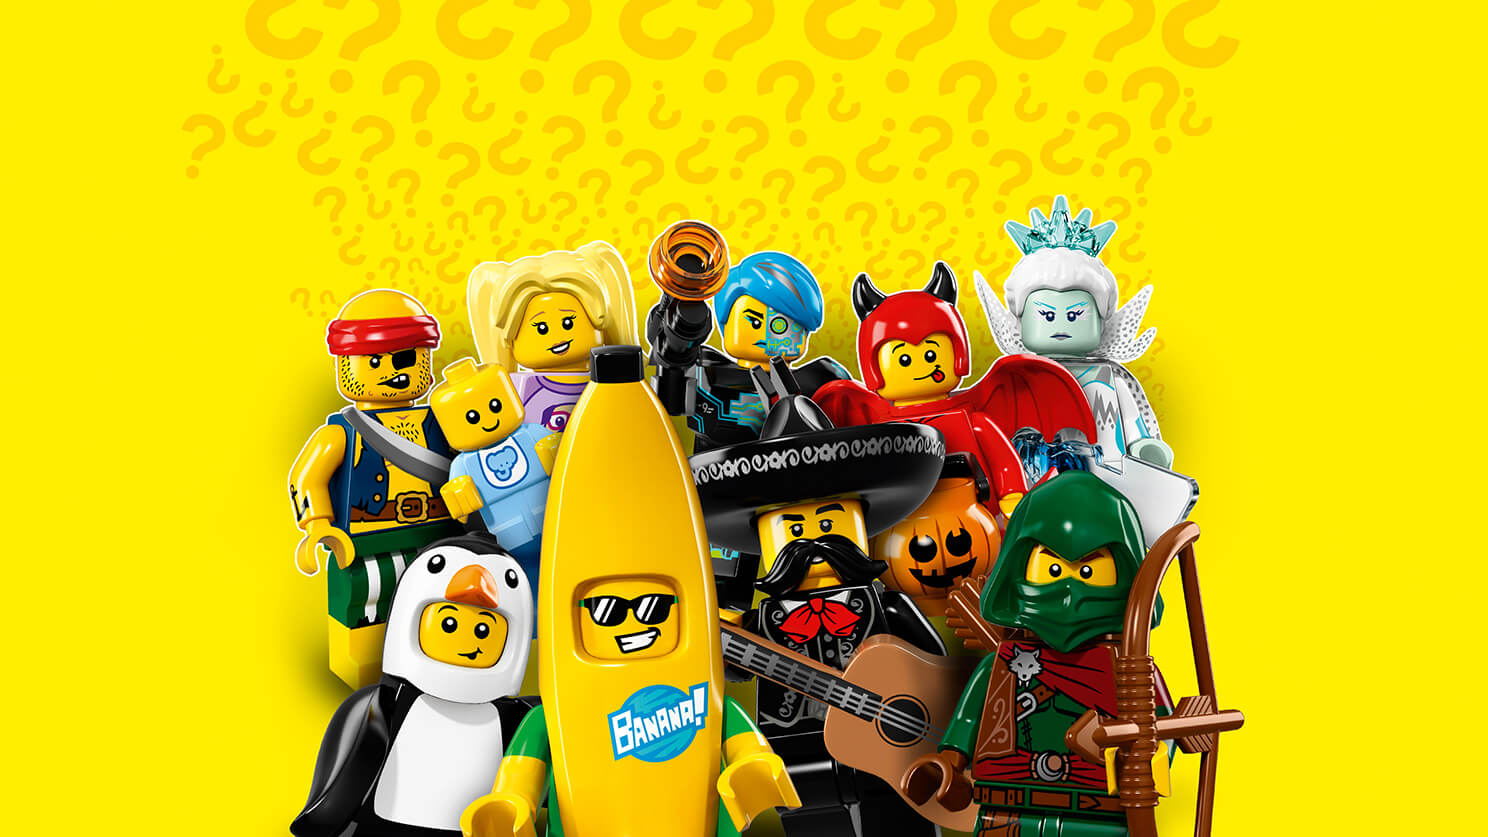 LEGO Minifigure 71013 Series 16 Banana Suit Guy for sale online 